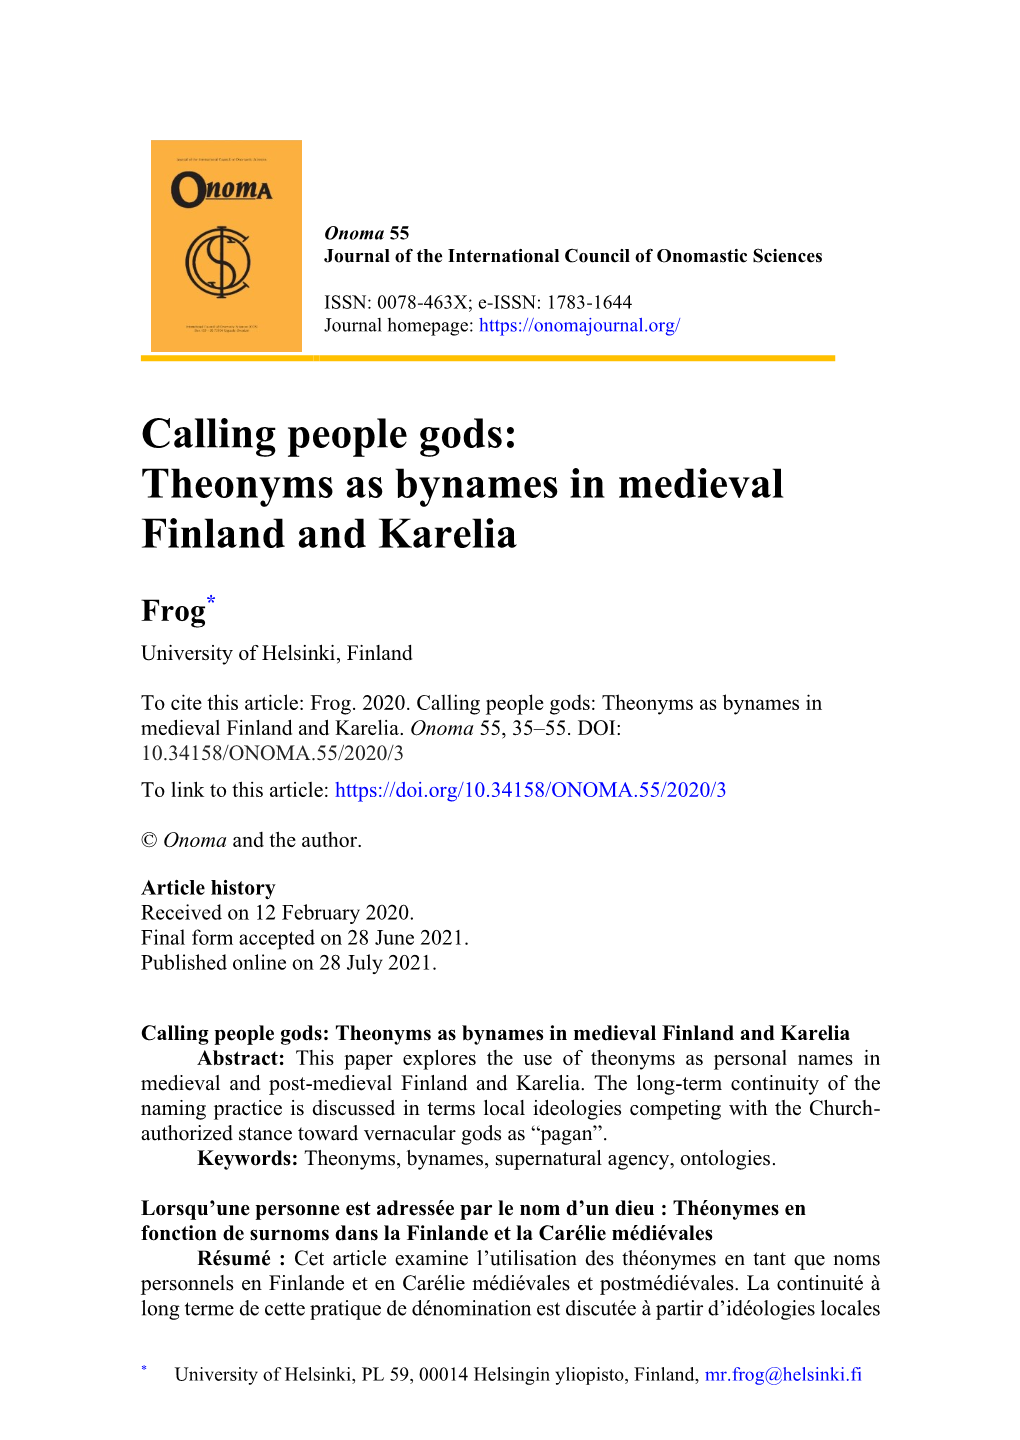 Calling People Gods: Theonyms As Bynames in Medieval Finland and Karelia